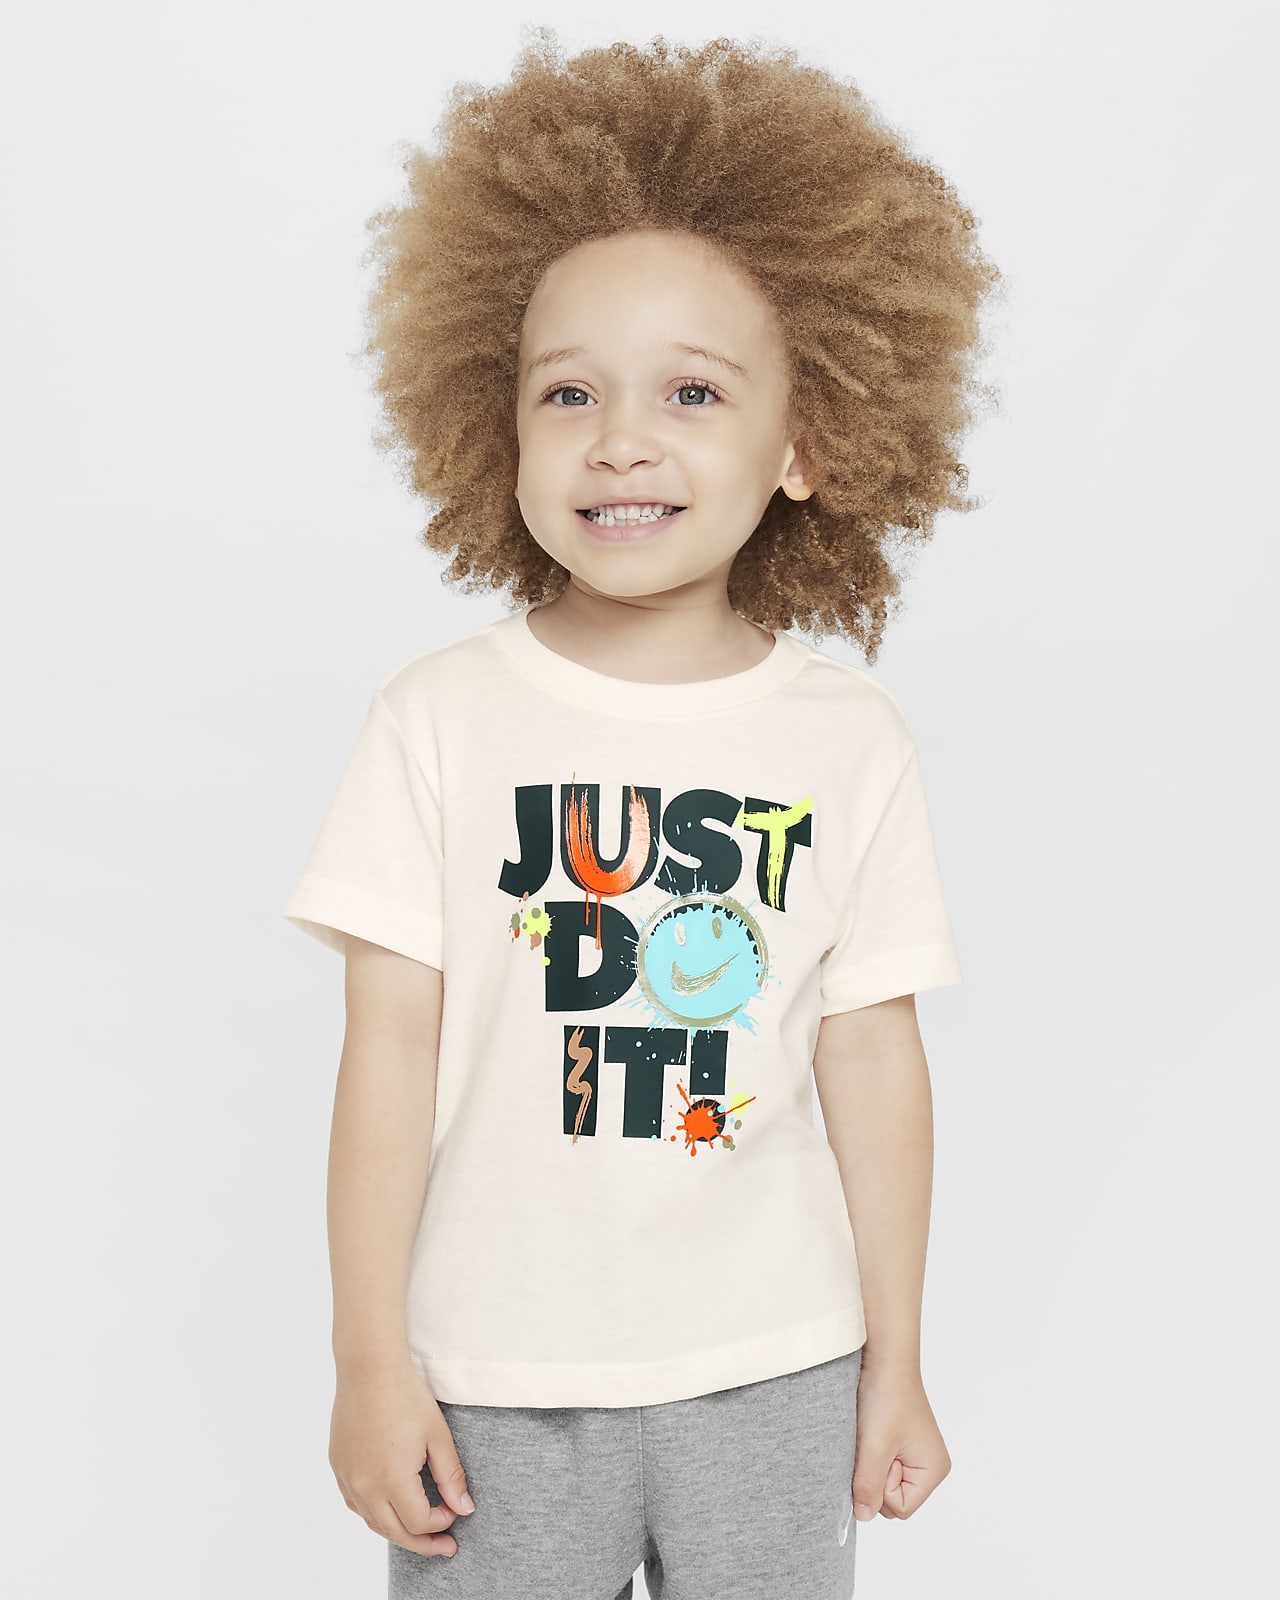 Nike "Express Yourself" Toddler "Just Do It" T-Shirt